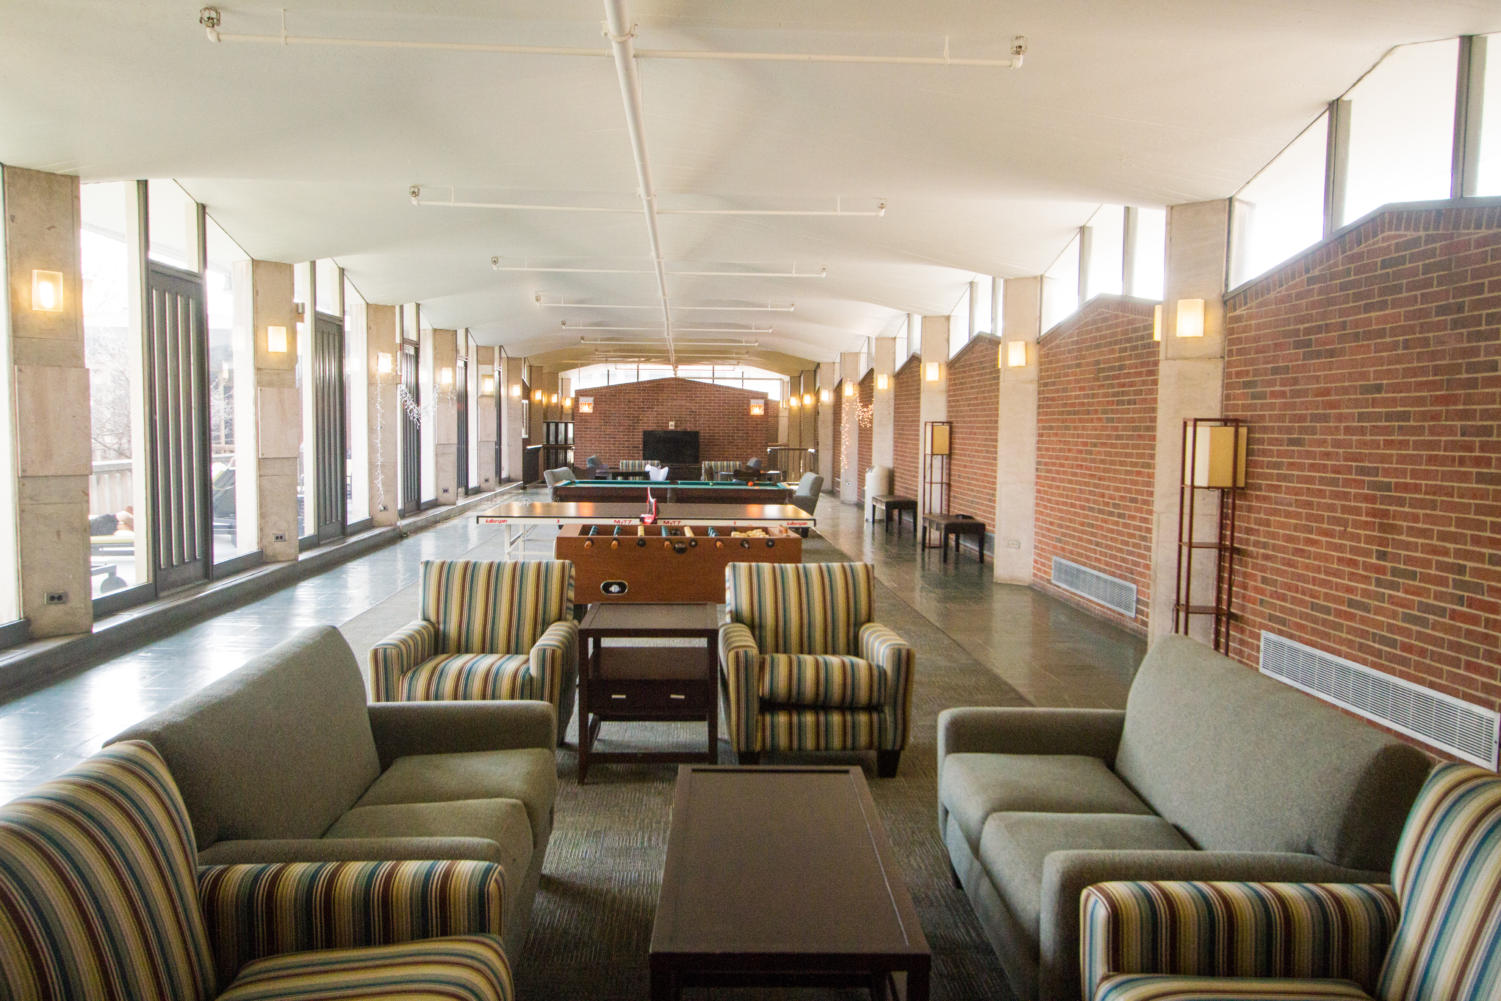 The Pierce Tower breezeway and its furniture “potentially clean enough to be salvaged before the building’s scheduled demolition.”